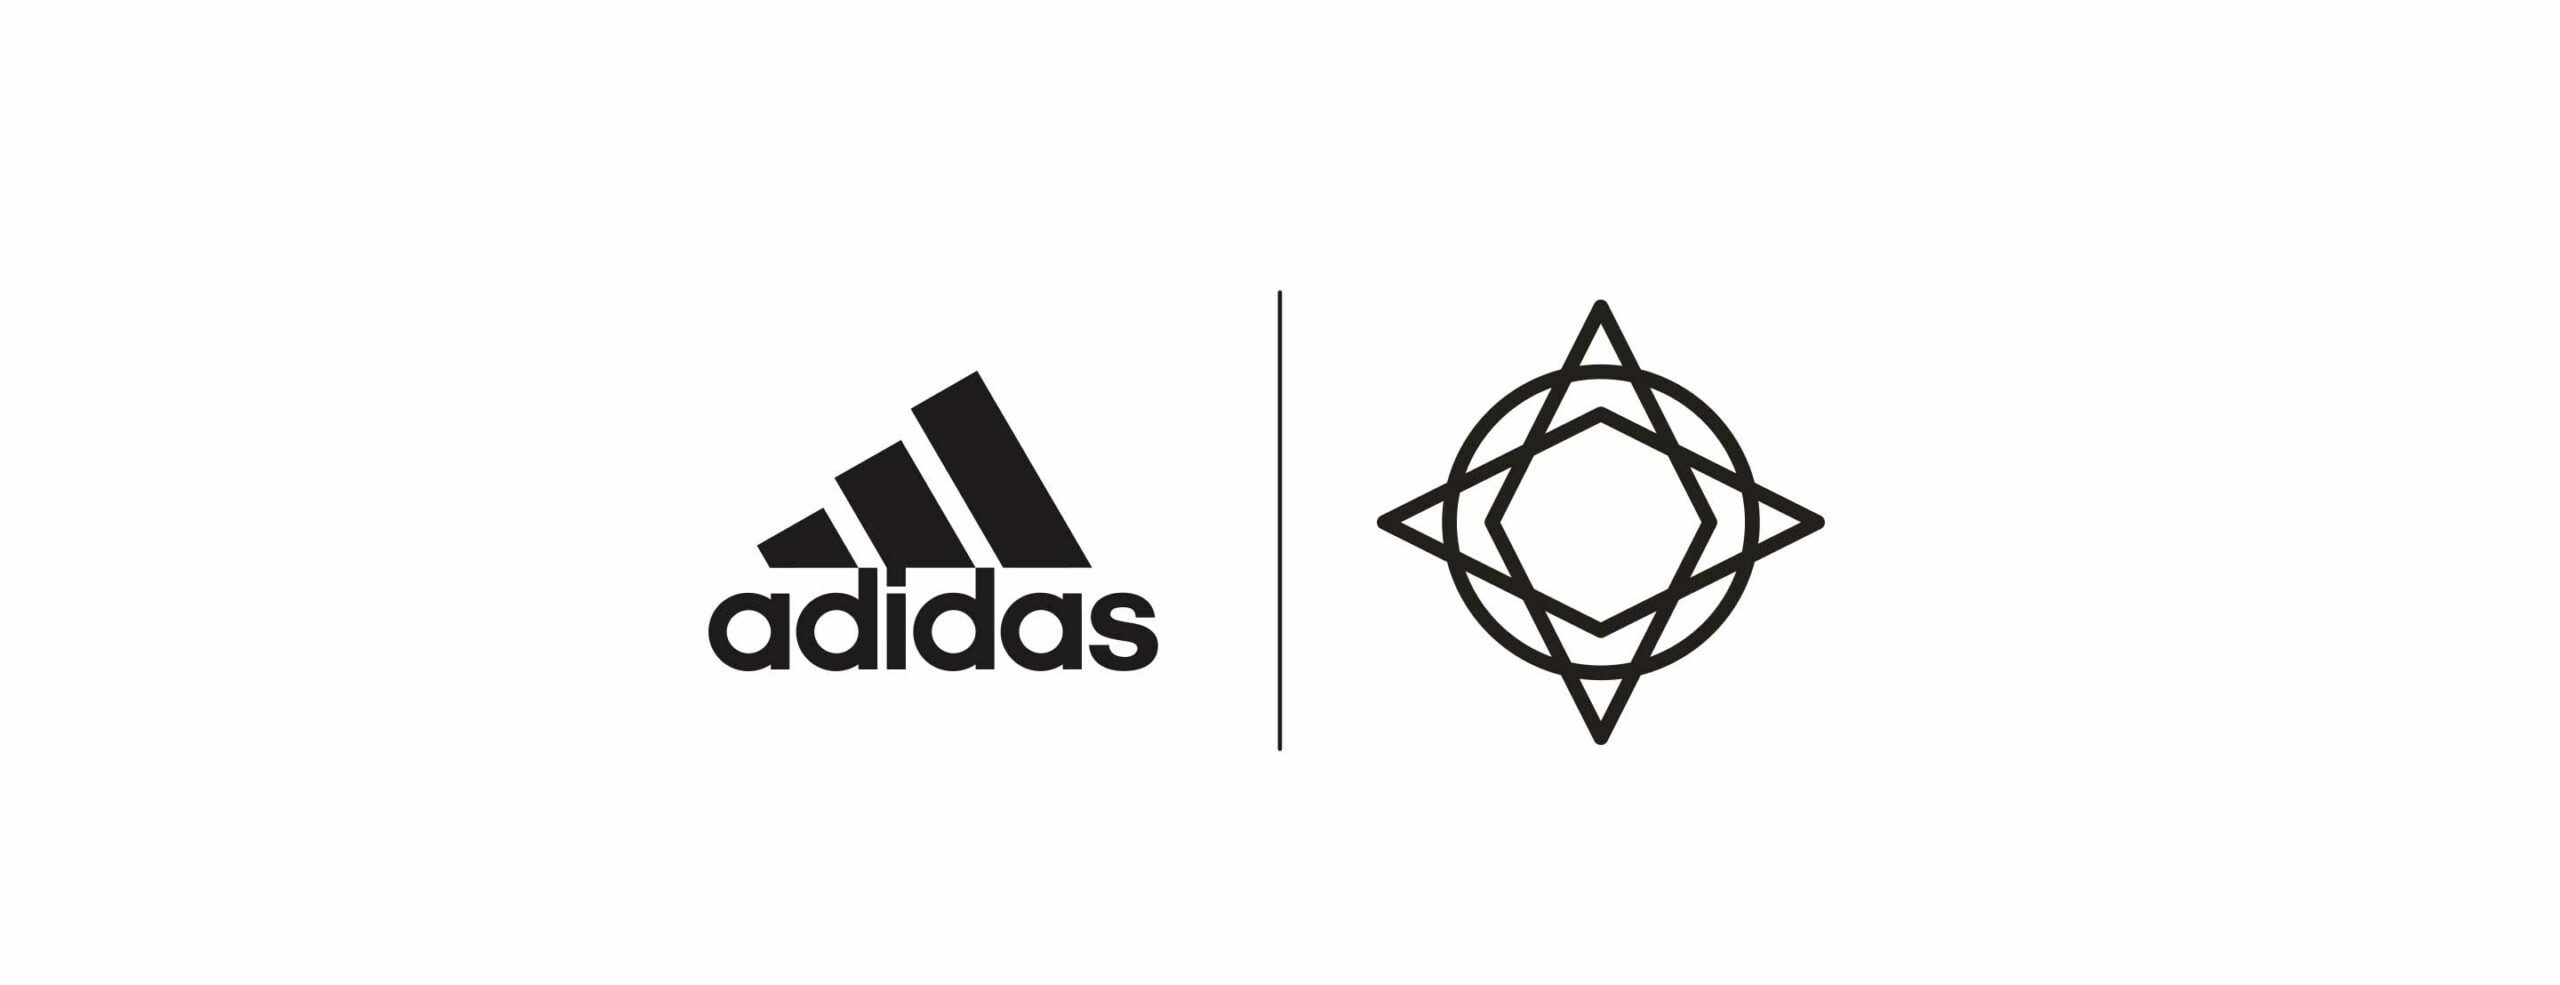 MM-Image-template-4-Adidas-logo-guide